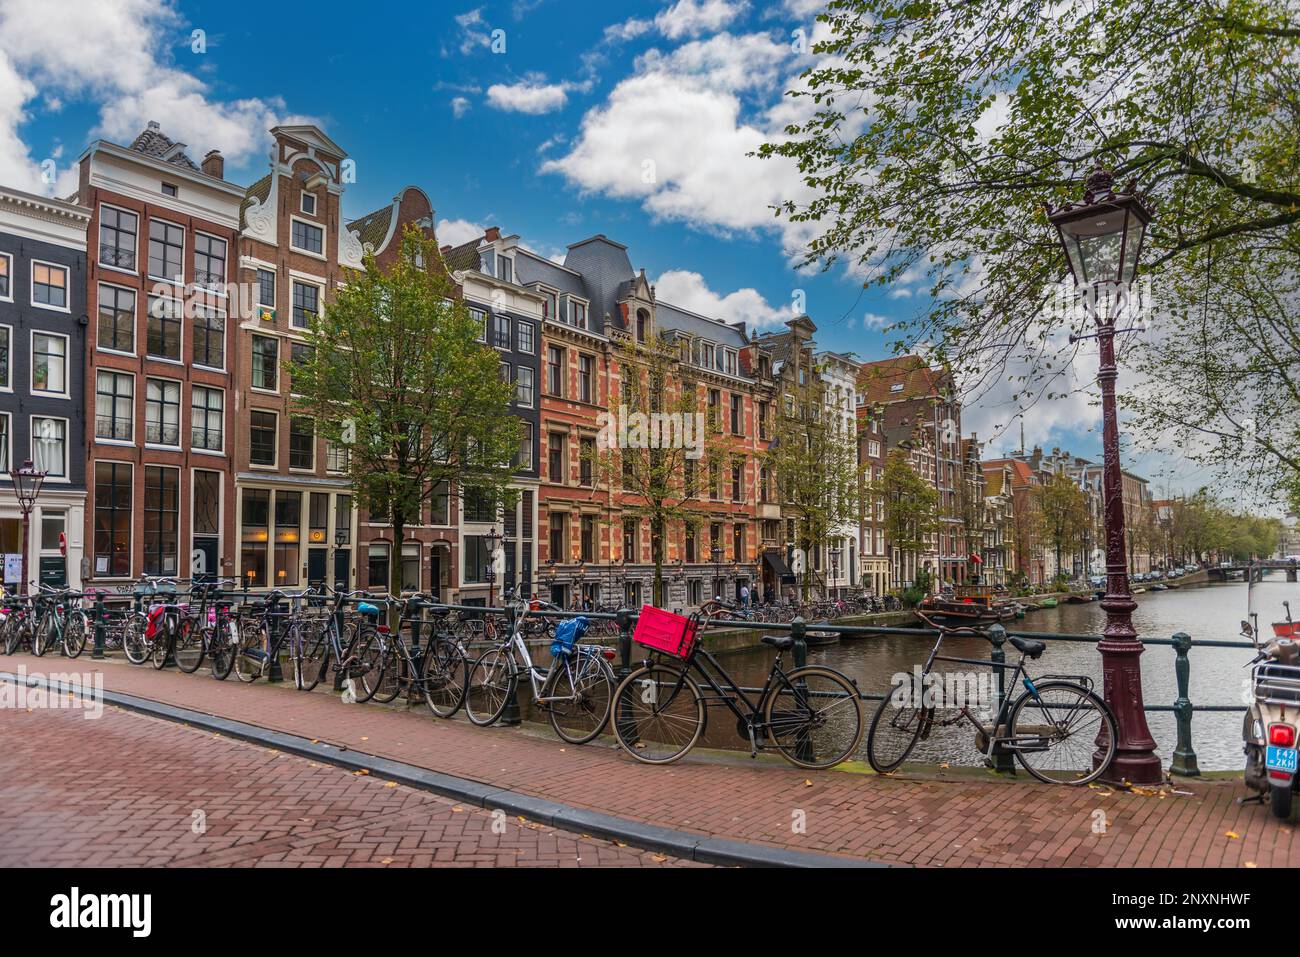 Typical Dutch facade along the canals, with many bicycles, in Amsterdam, Holland, Netherlands Stock Photo